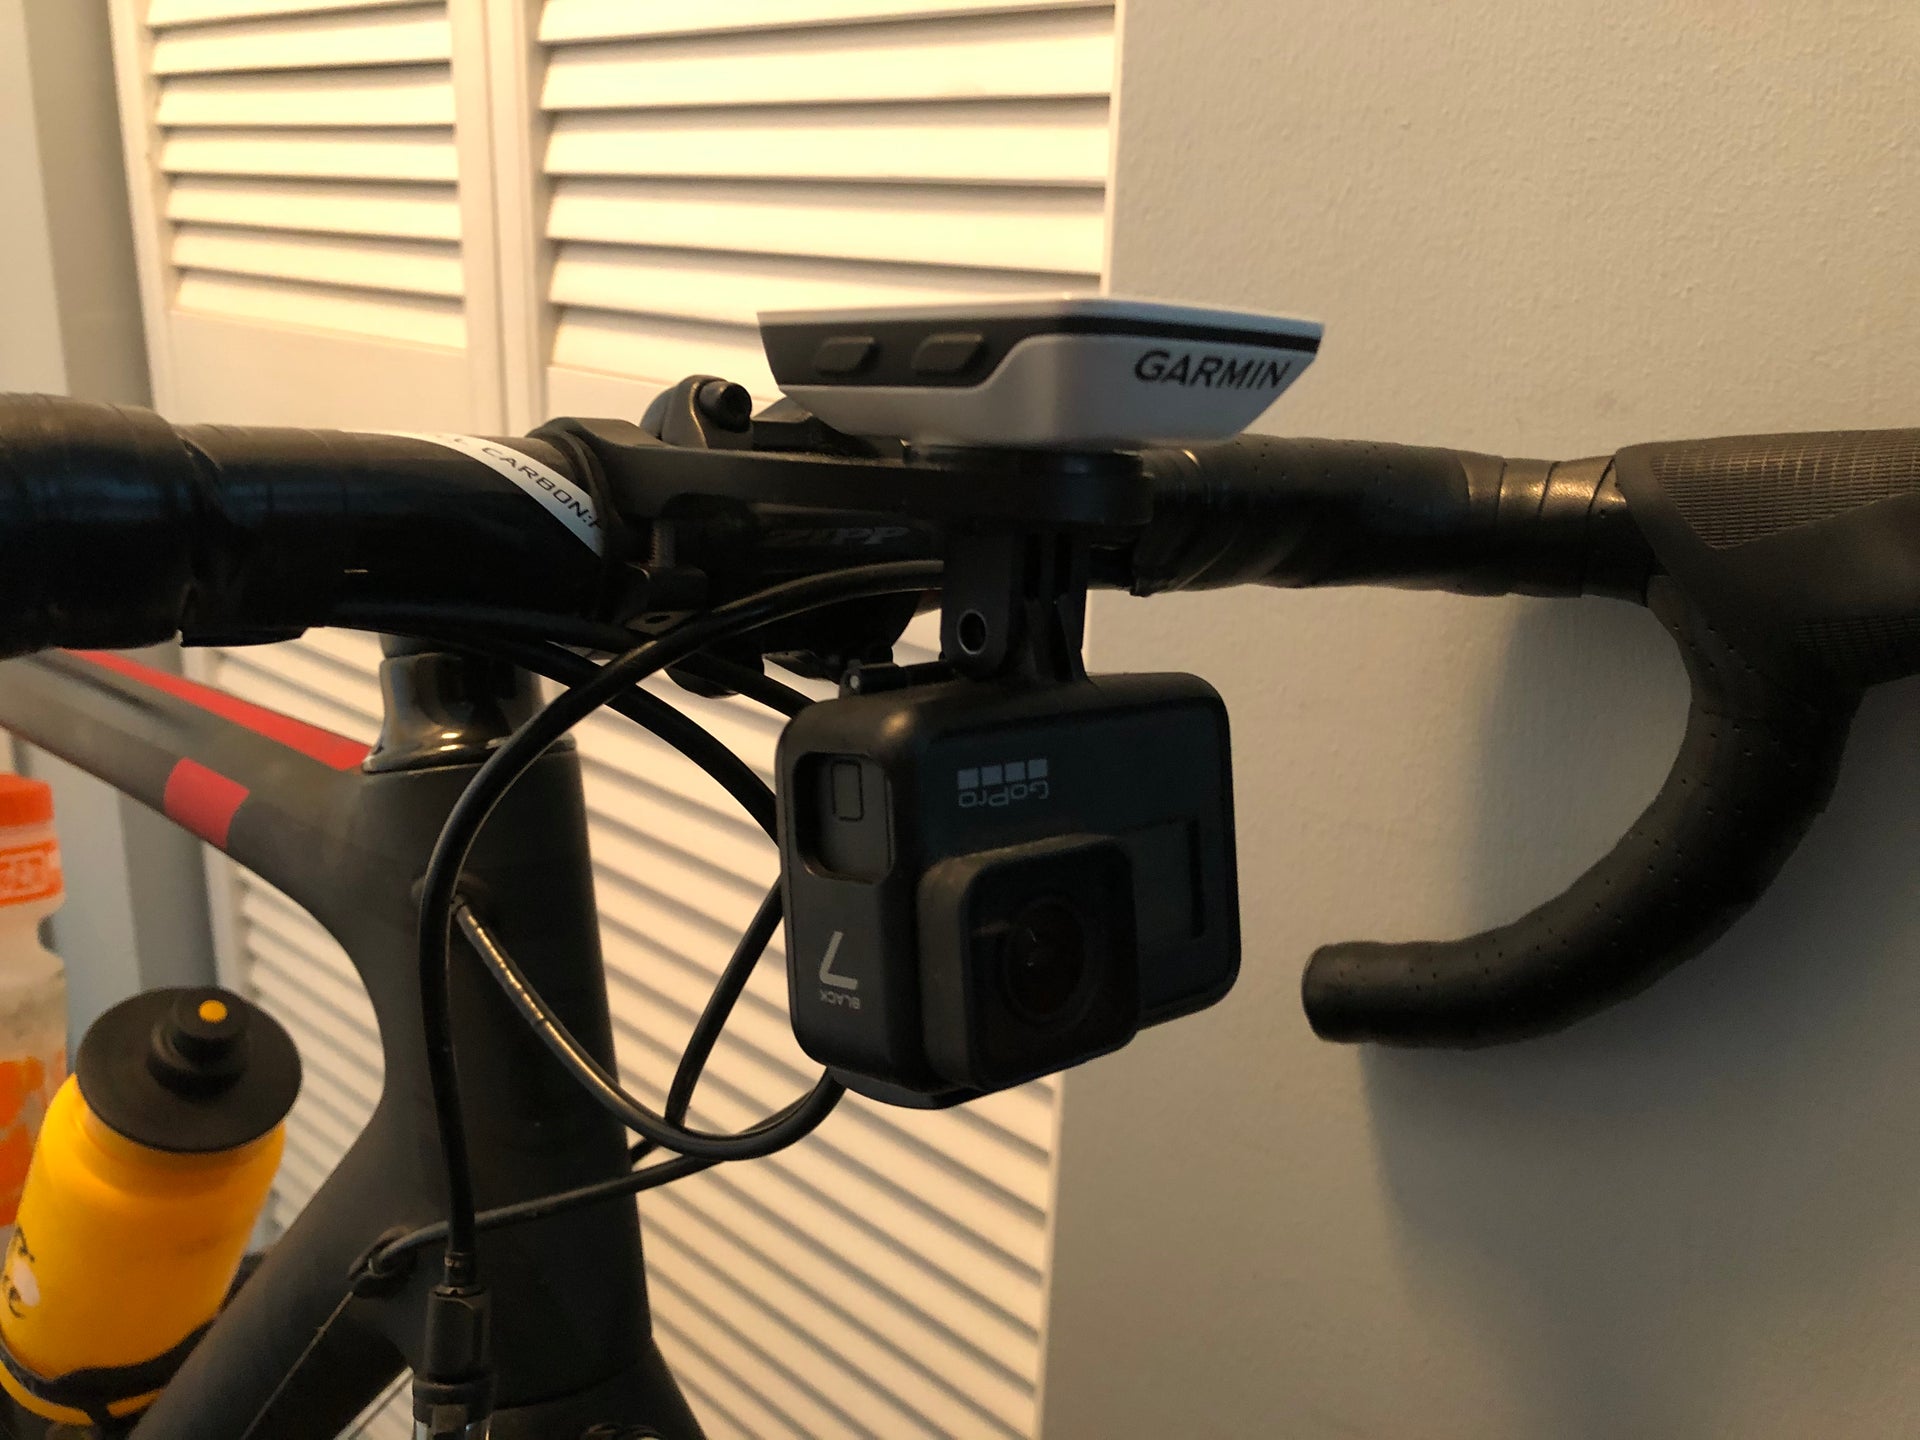 Mount my GoPro to my Bicycle Helmet, Handlebars, or Chest?